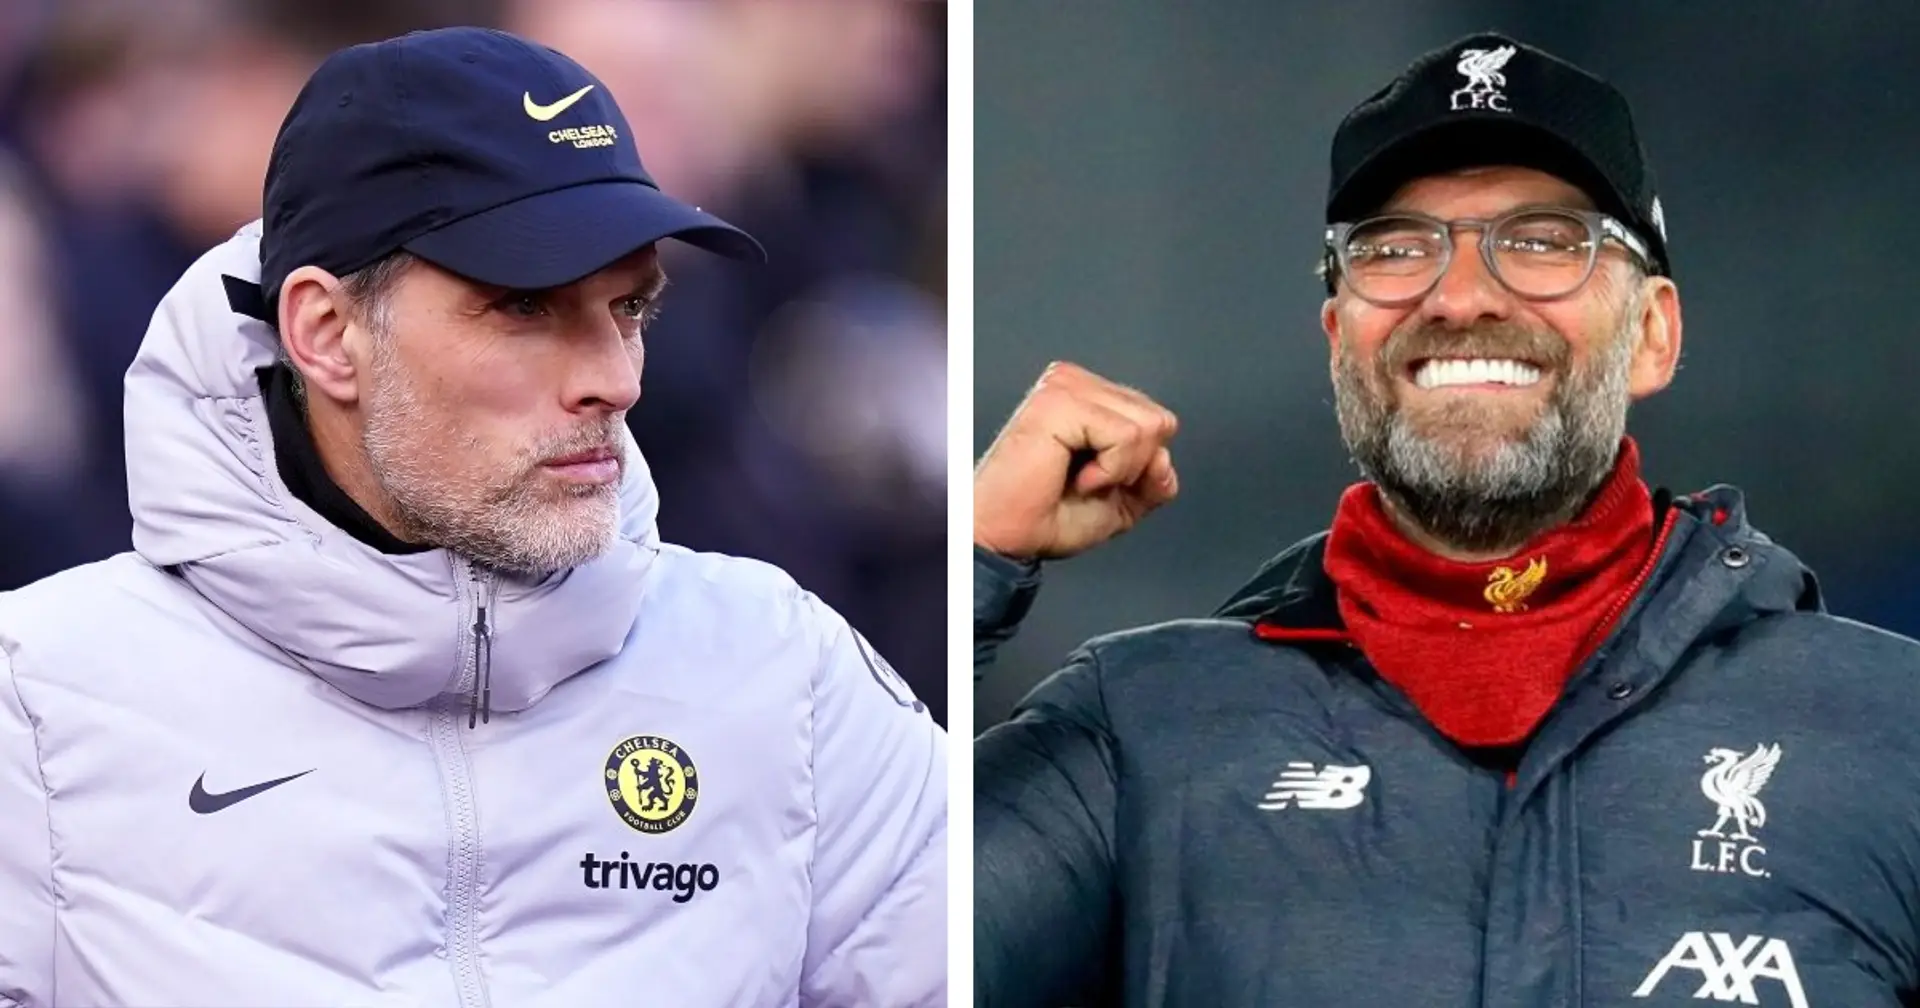 Tuchel to overtake Klopp? Comparing trophies won by the German bosses since Tuchel's arrival